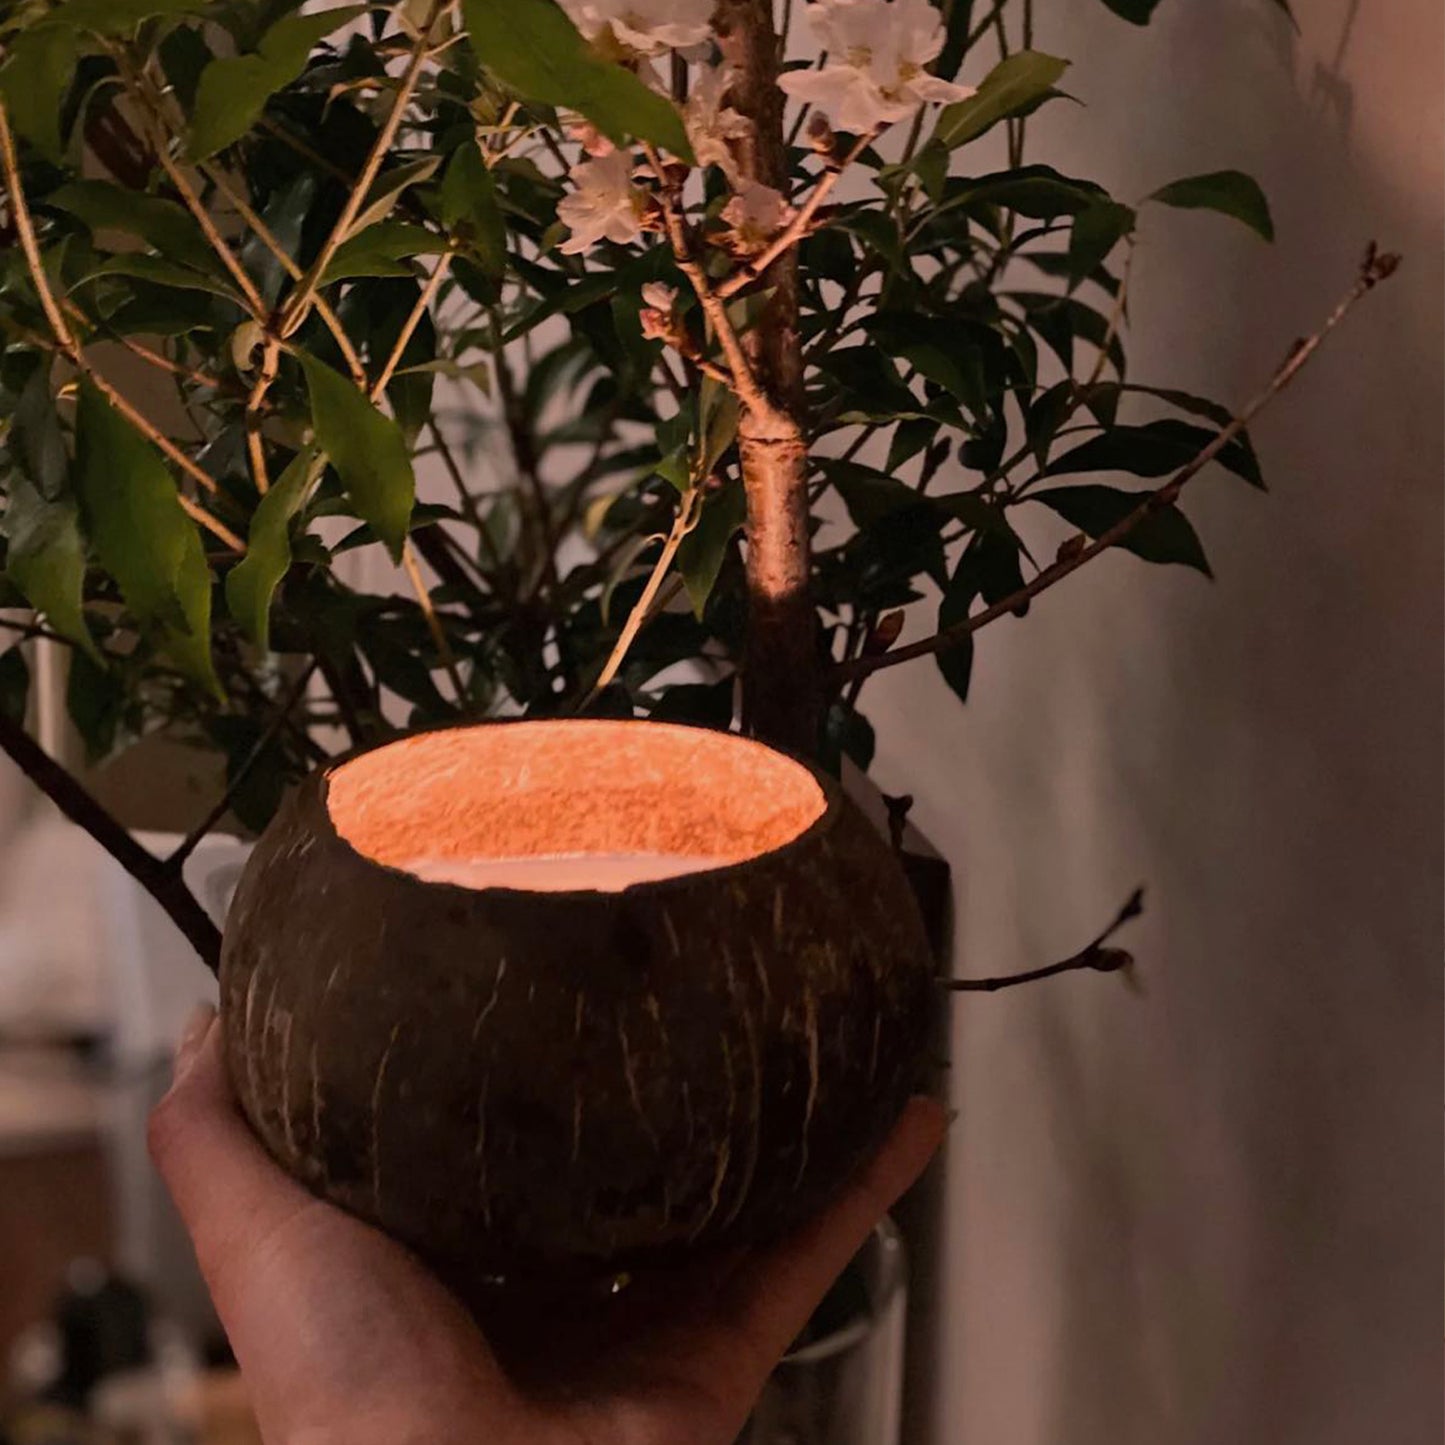 Empty Coconut Shell for Homemade Candle